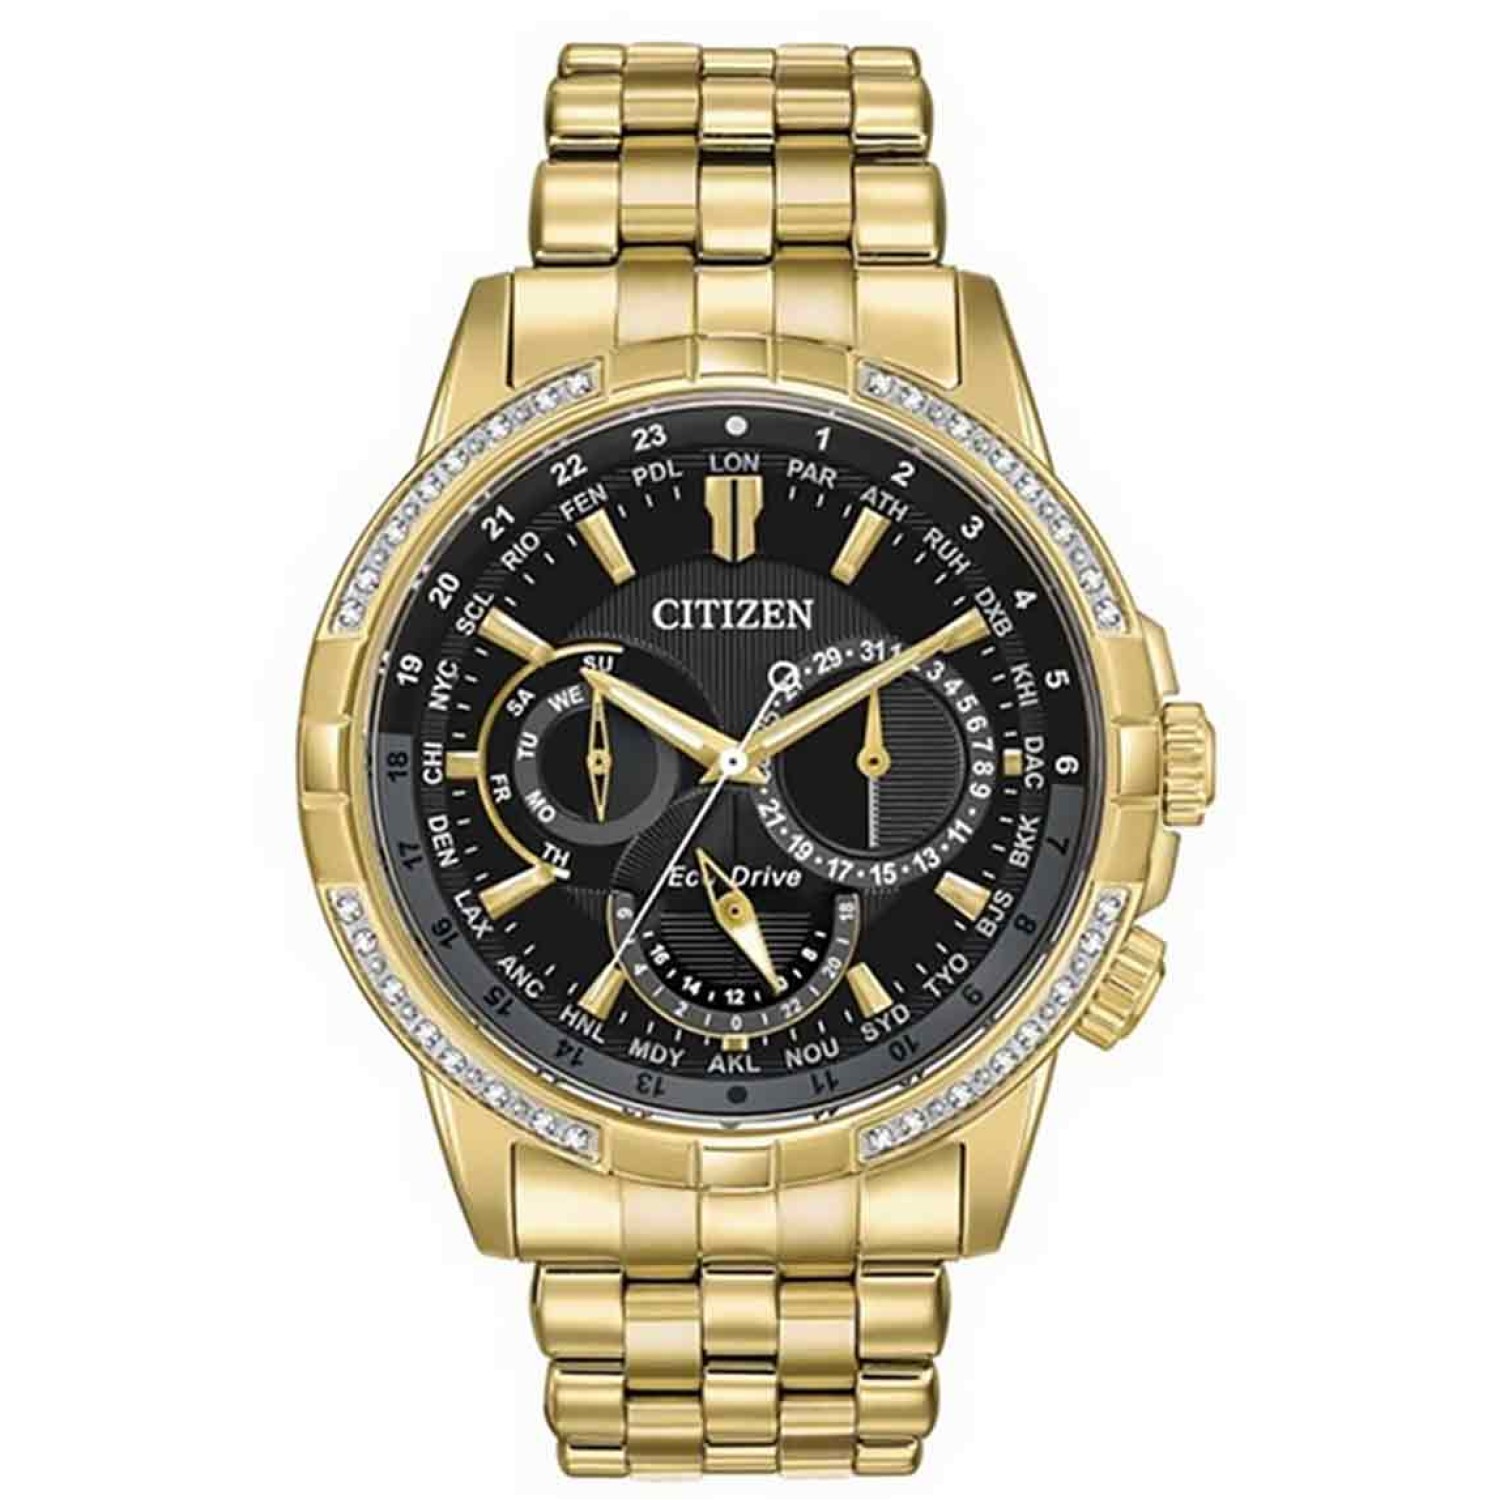 BU2082-56E Citizen Eco-Drive Diamond Mens Watch. Designed for world time presentation with comprehensive international face markings, it also provides day/date display, 12 and 24 hour time and convenient low charge indicator. Delivering confidence by way 